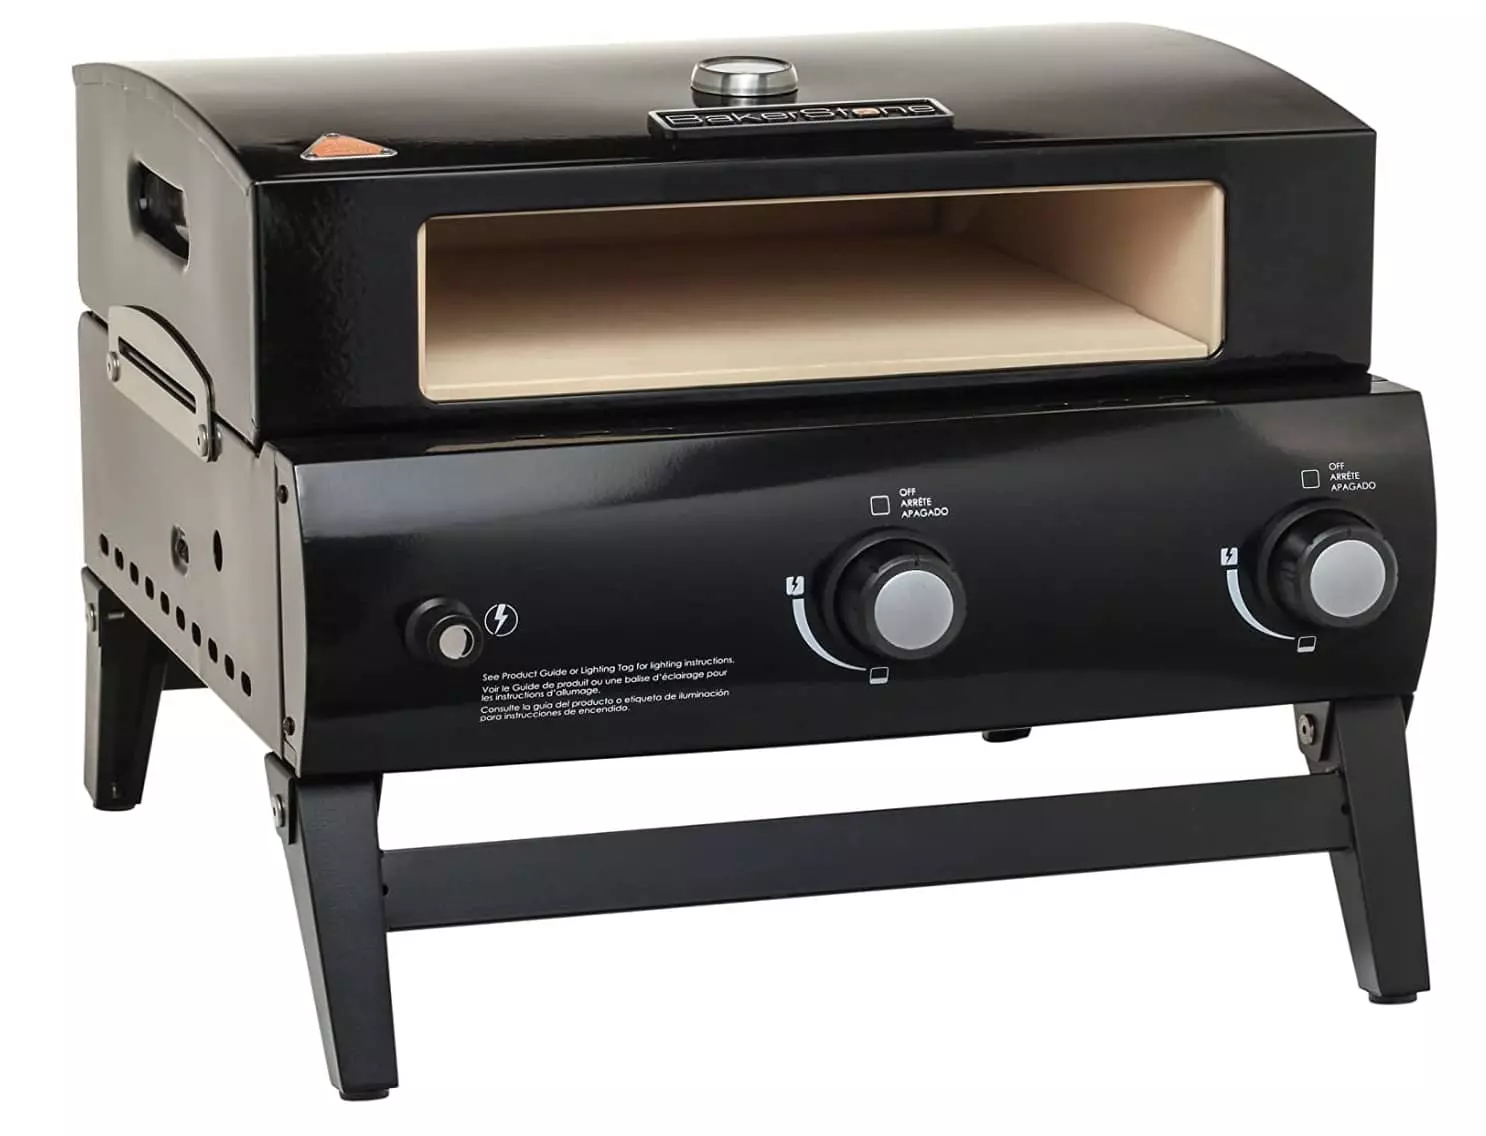 BakerStone Portable Gas Pizza Oven Review